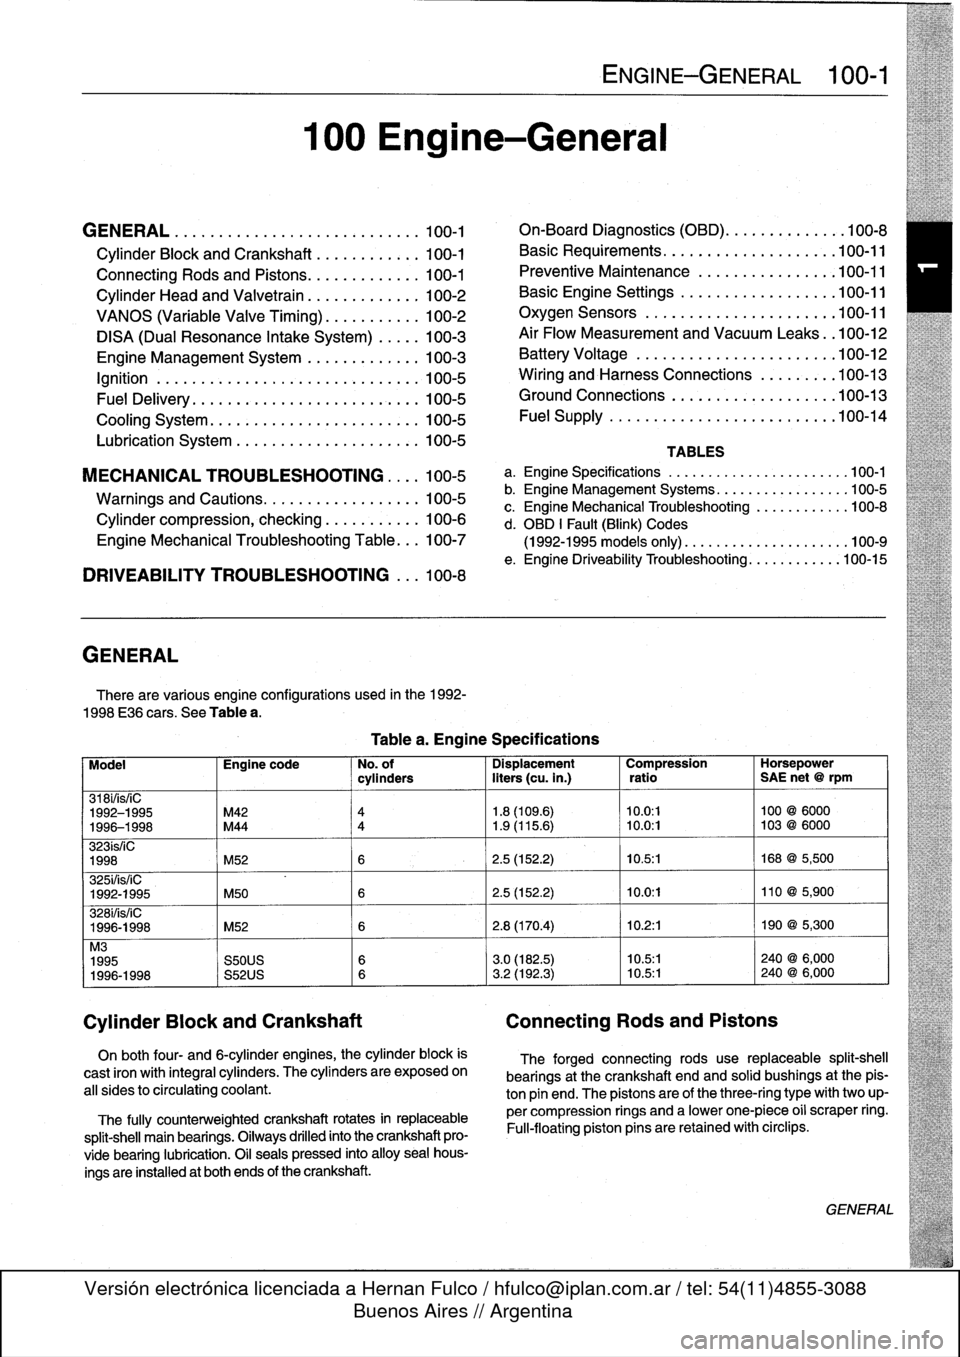 BMW 325i 1993 E36 User Guide 
GENERAL
.
.....
.
.
.
.
.
.
.
...
.
.
.
.
.
.
.
.
.
...
100-1

Cylinder
Block
and
Crankshaft
.
.
.
.
.
.
.
.
.
...
100-1

Connecting
Rods
and
Pistons
.
.
.
.
.
.
.
.
.
.
.
.
.
100-1

Cylinder
Head
an